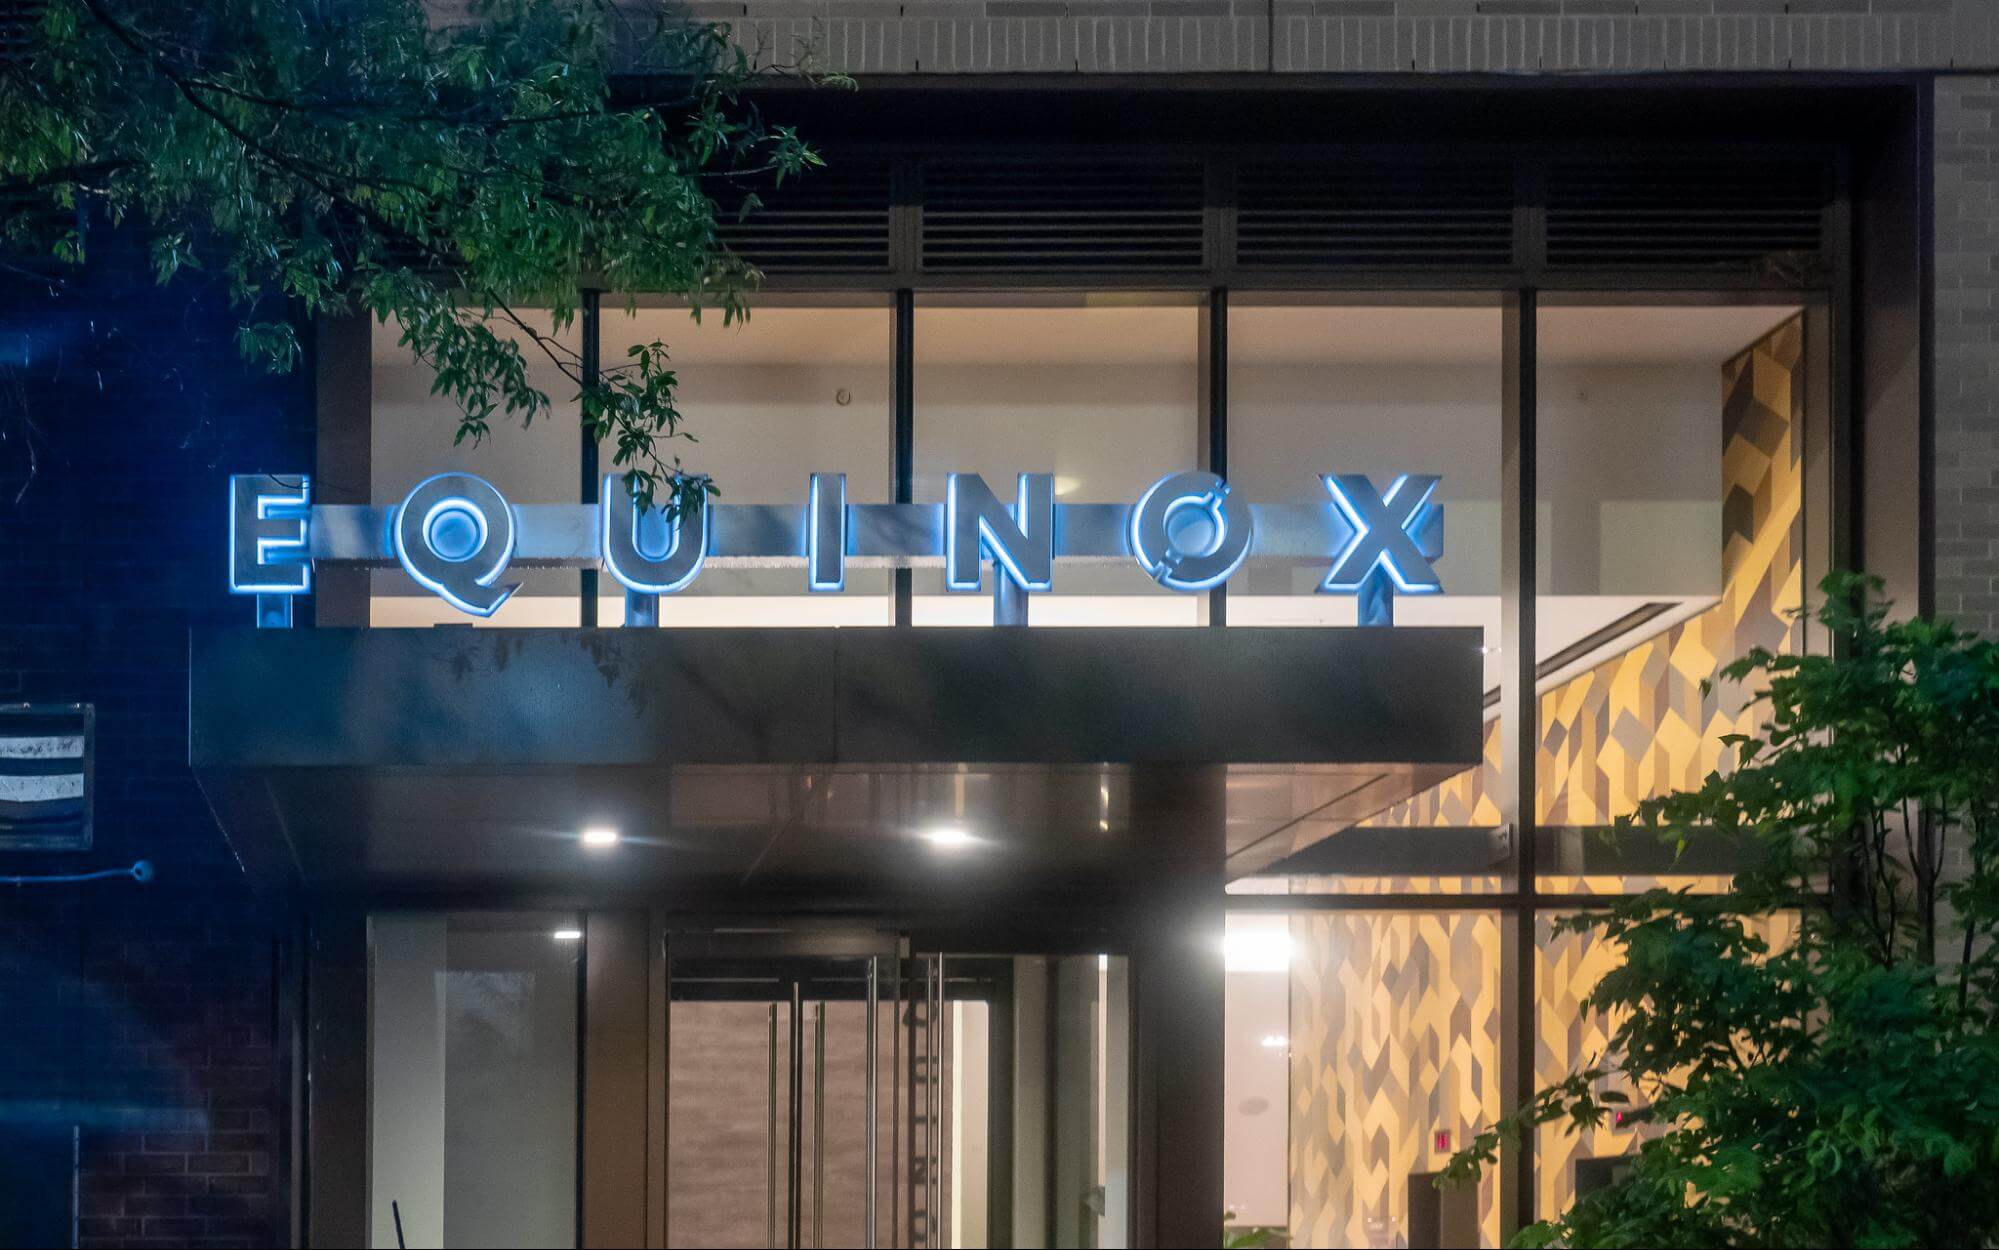 Equinox Gyms brand on a building.